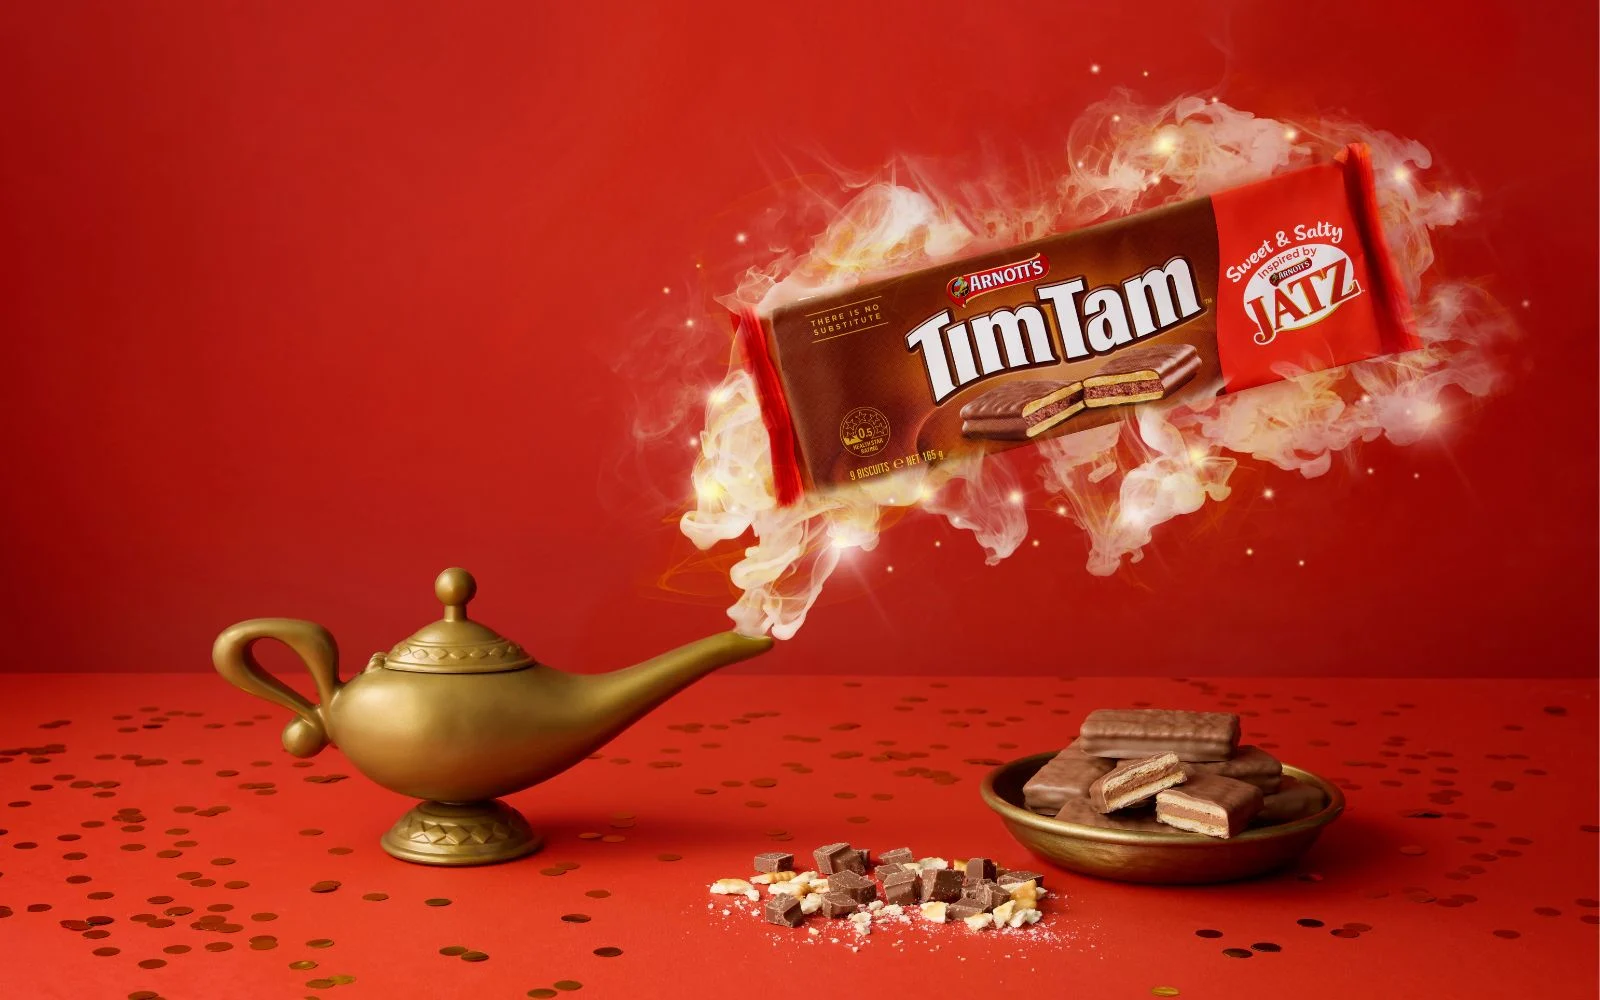 Hero Image Recipe Article - WHEN SWEET MET SALTY: AUSTRALIA ASKED AND TIM TAM DELIVERED 